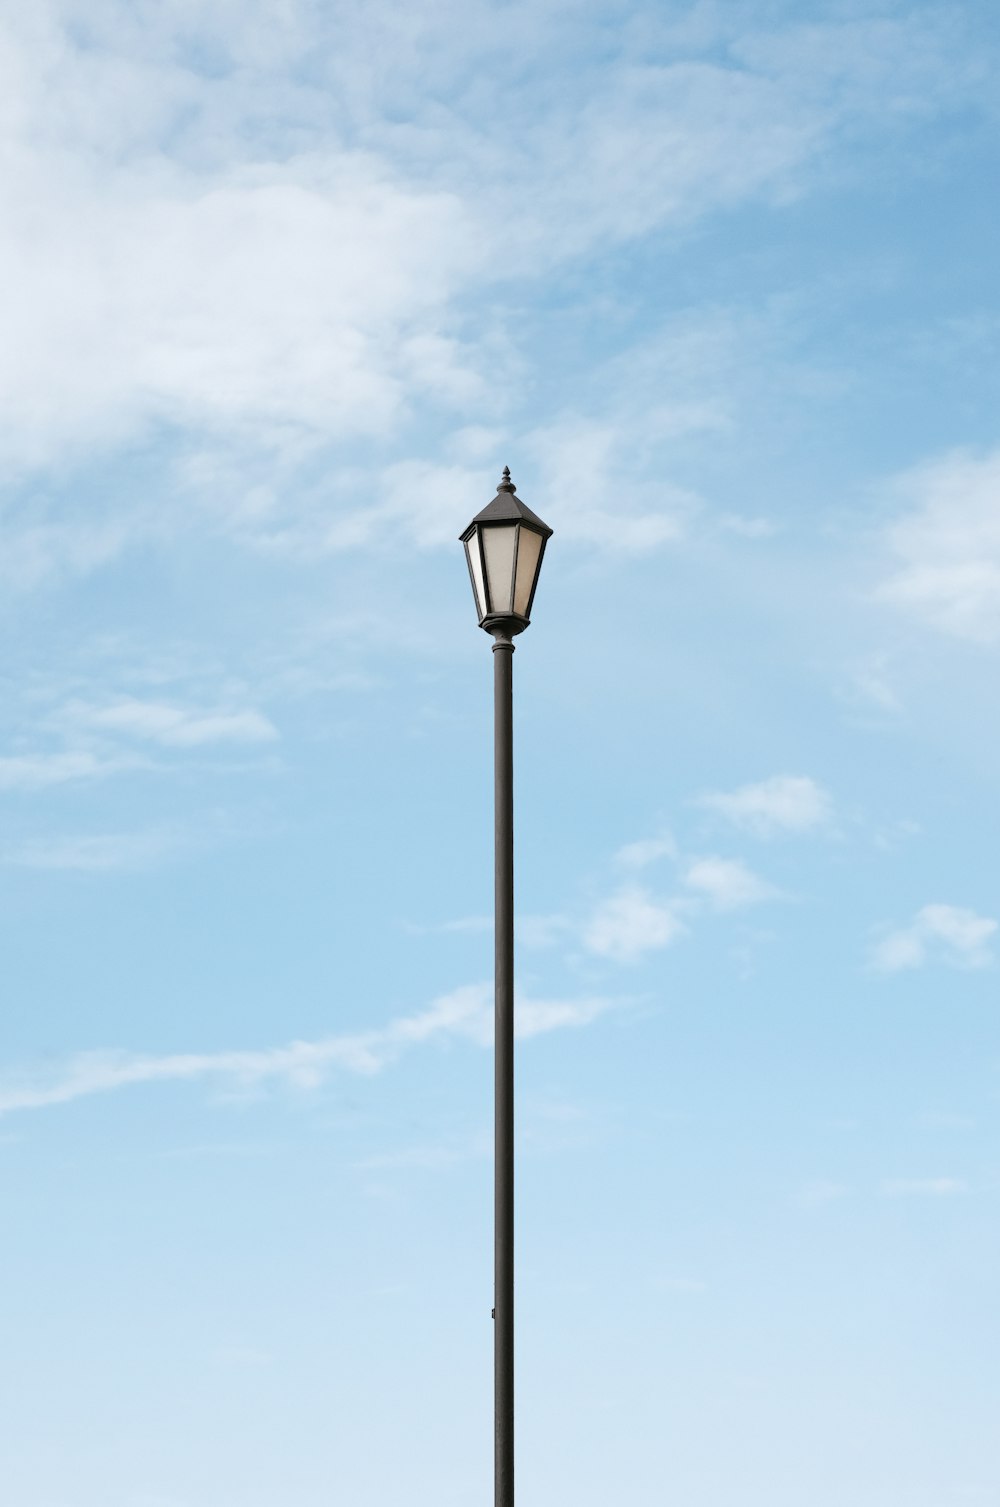 500+ Street Lamp Pictures | Download Free Images on Unsplash